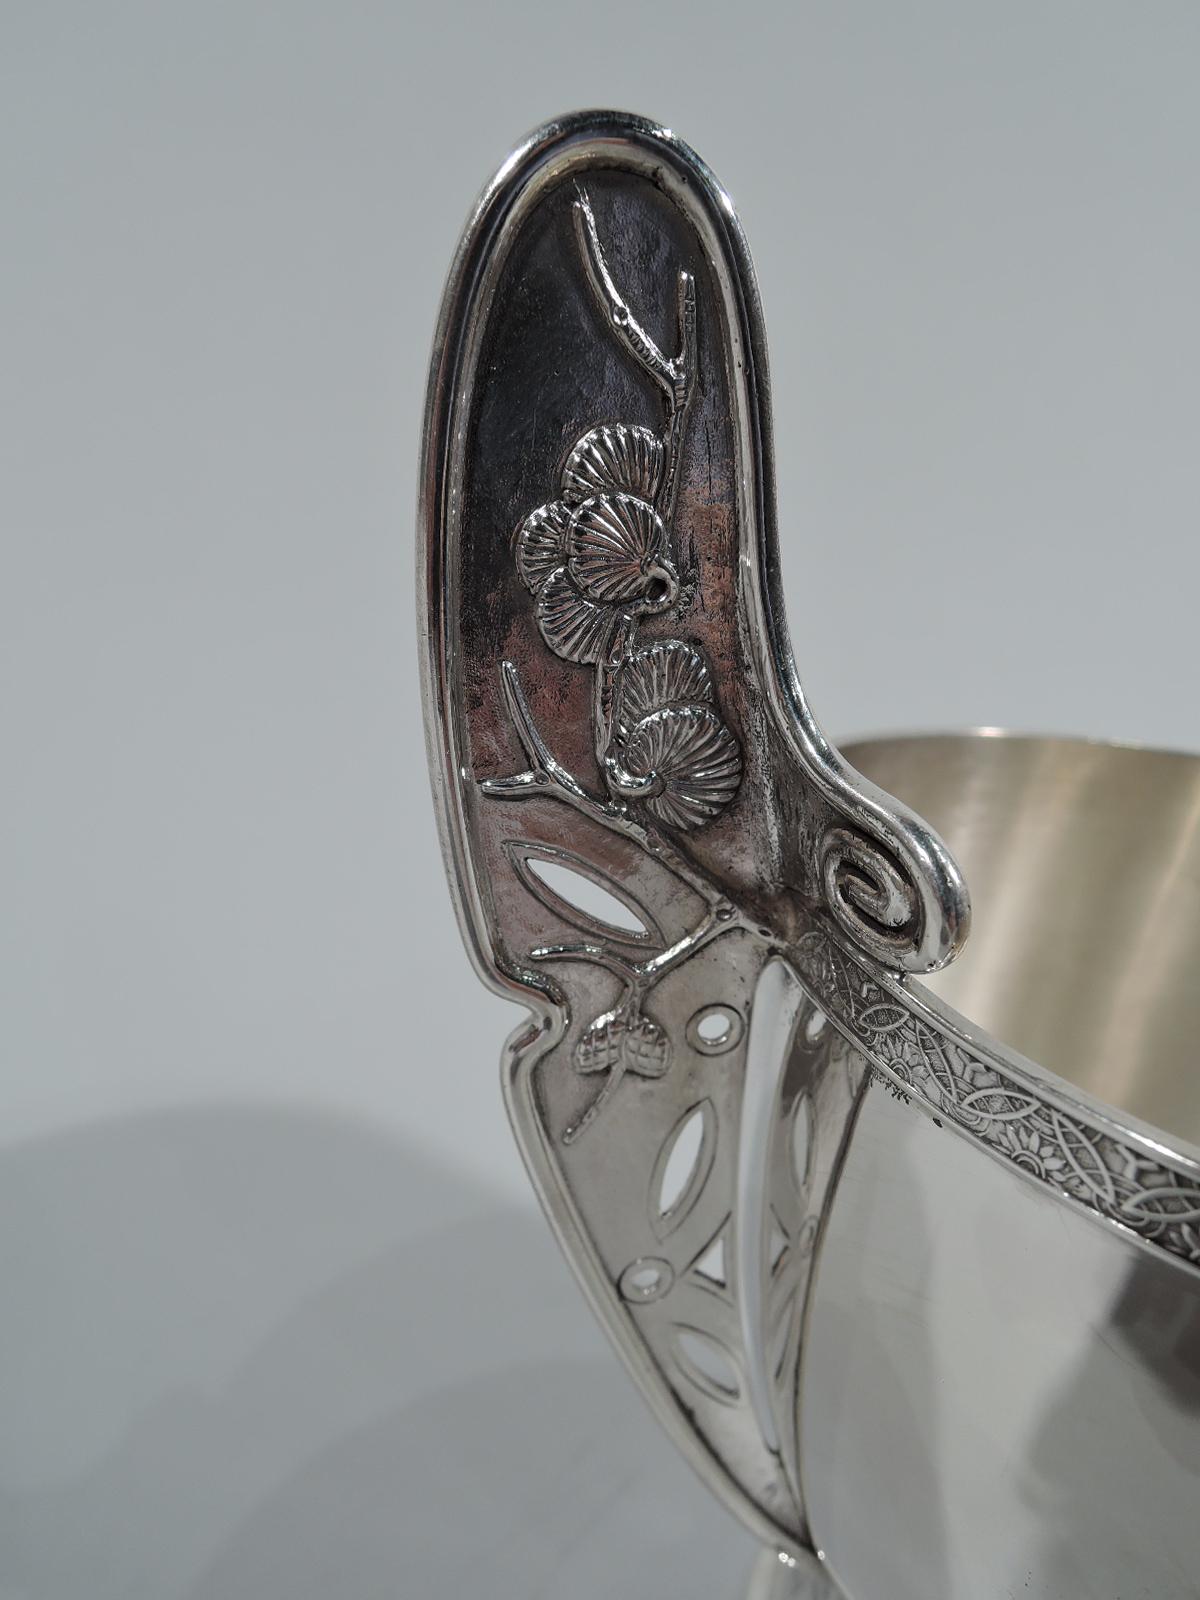 19th Century Rare Aesthetic Japonesque Sterling Silver Creamer and Sugar by Tiffany